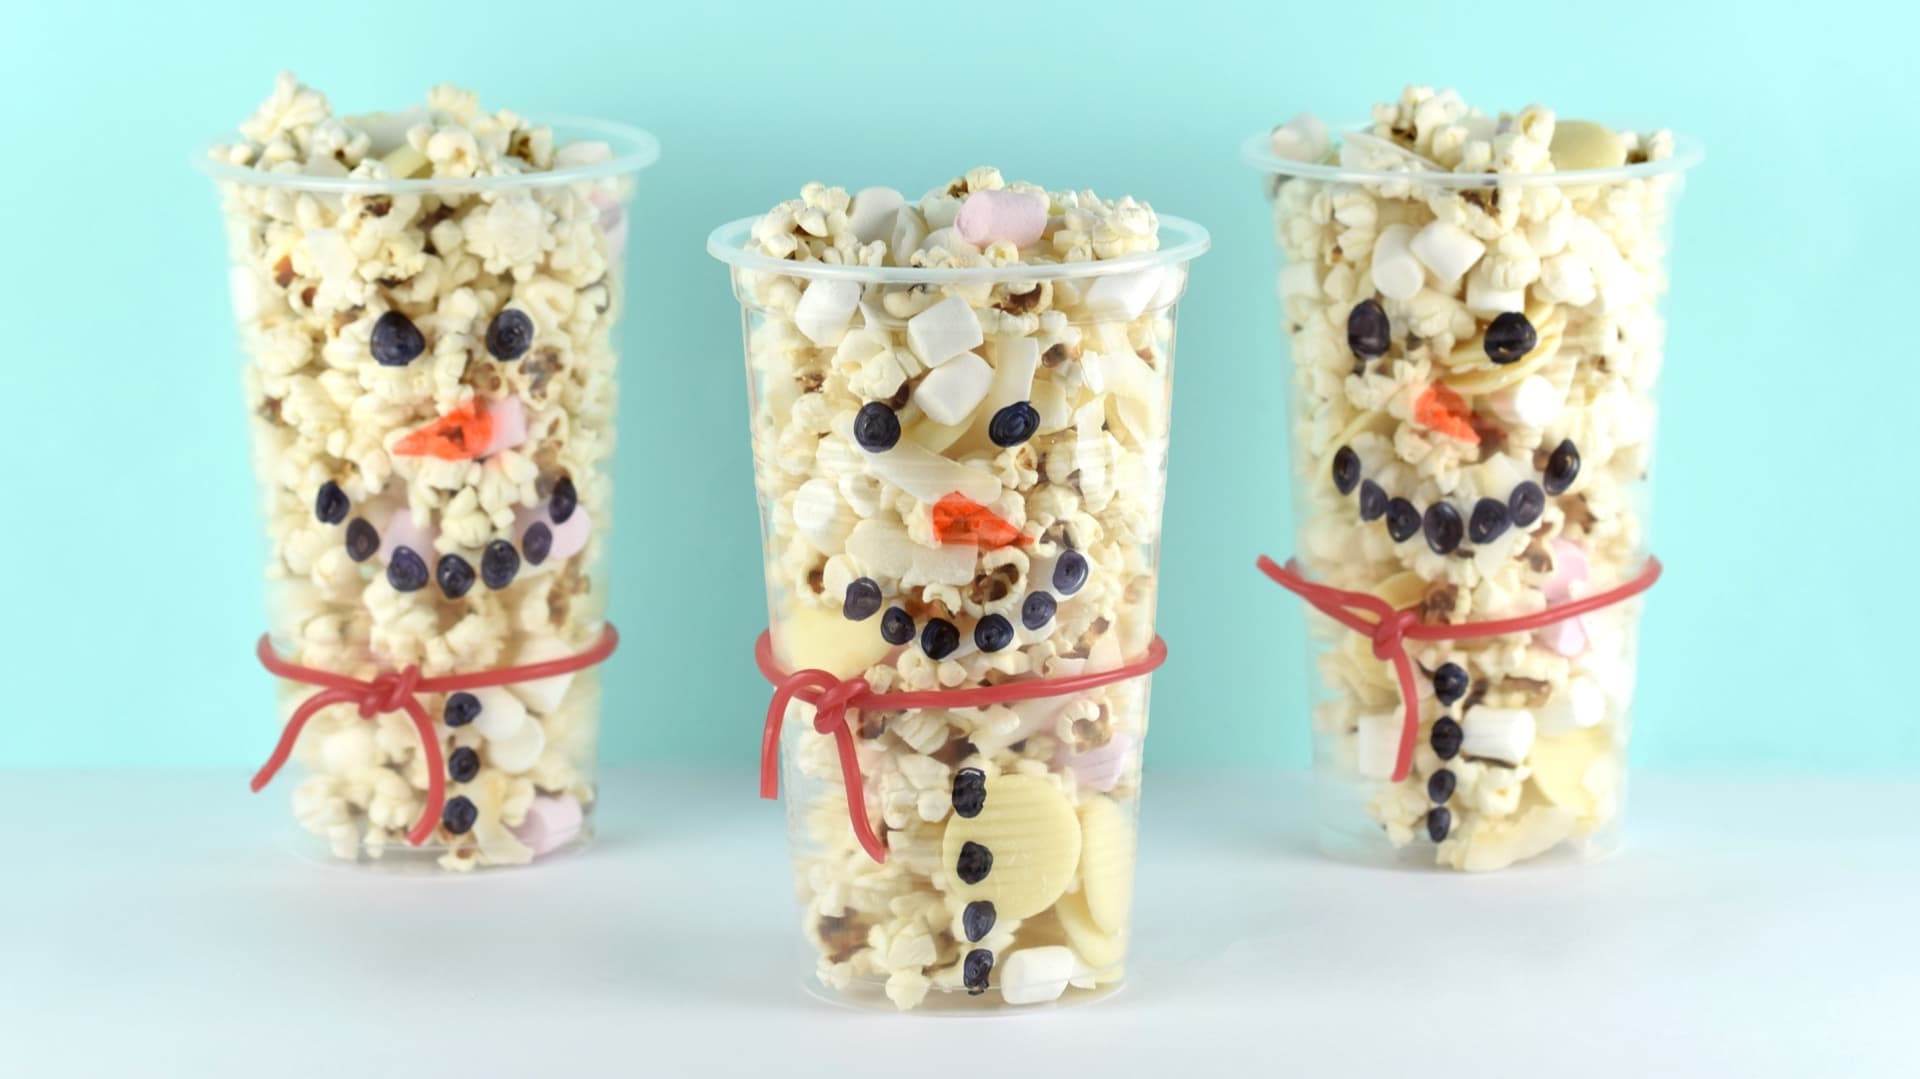 Party snack cups  Party snacks, Snack cups, Food